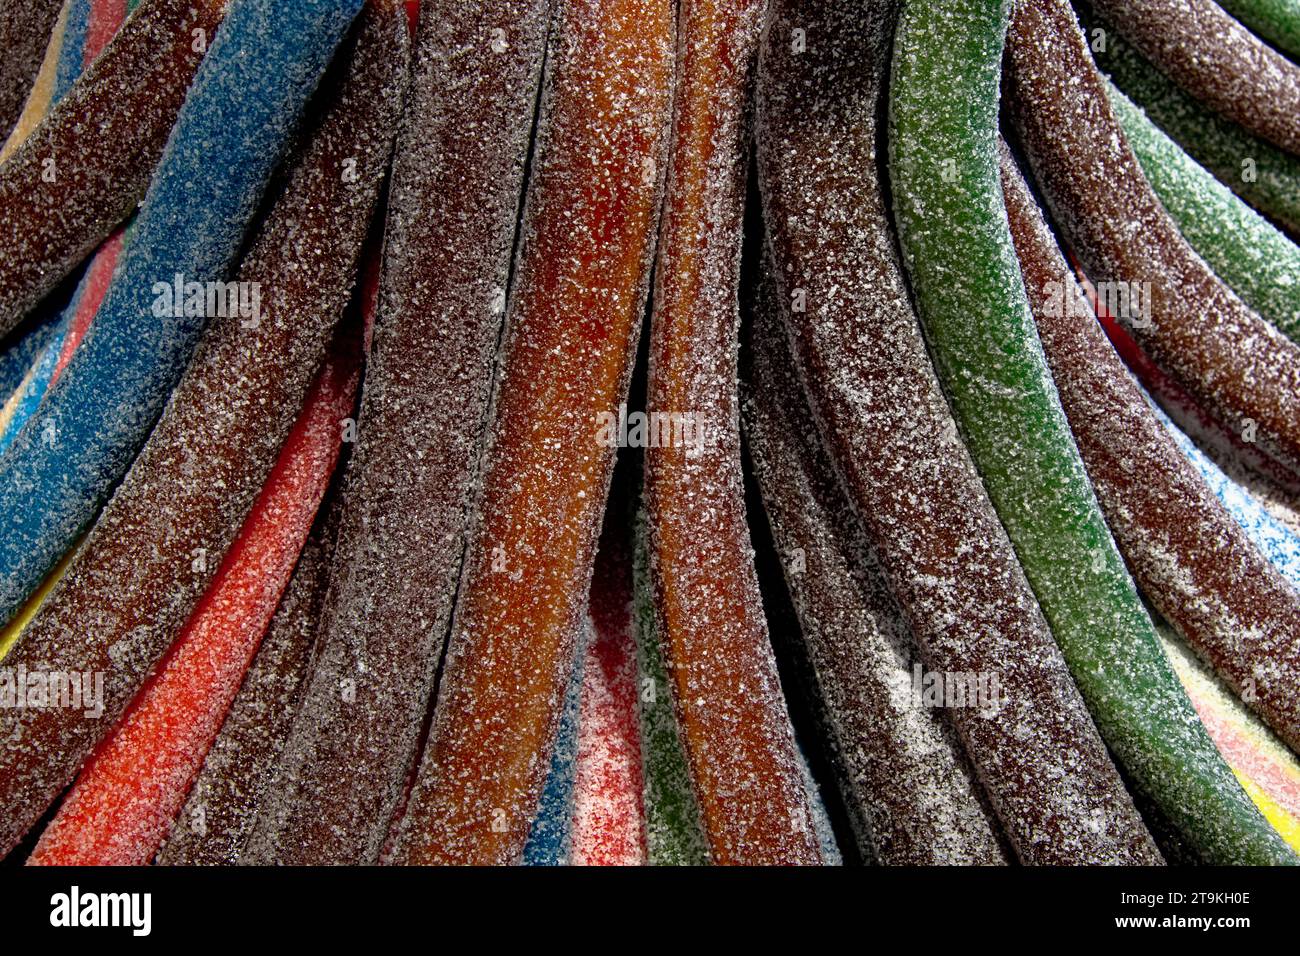 A close-up of colorful candy ropes. They are twisted, sugar-coated, and come in red, blue, green, and brown. Stock Photo